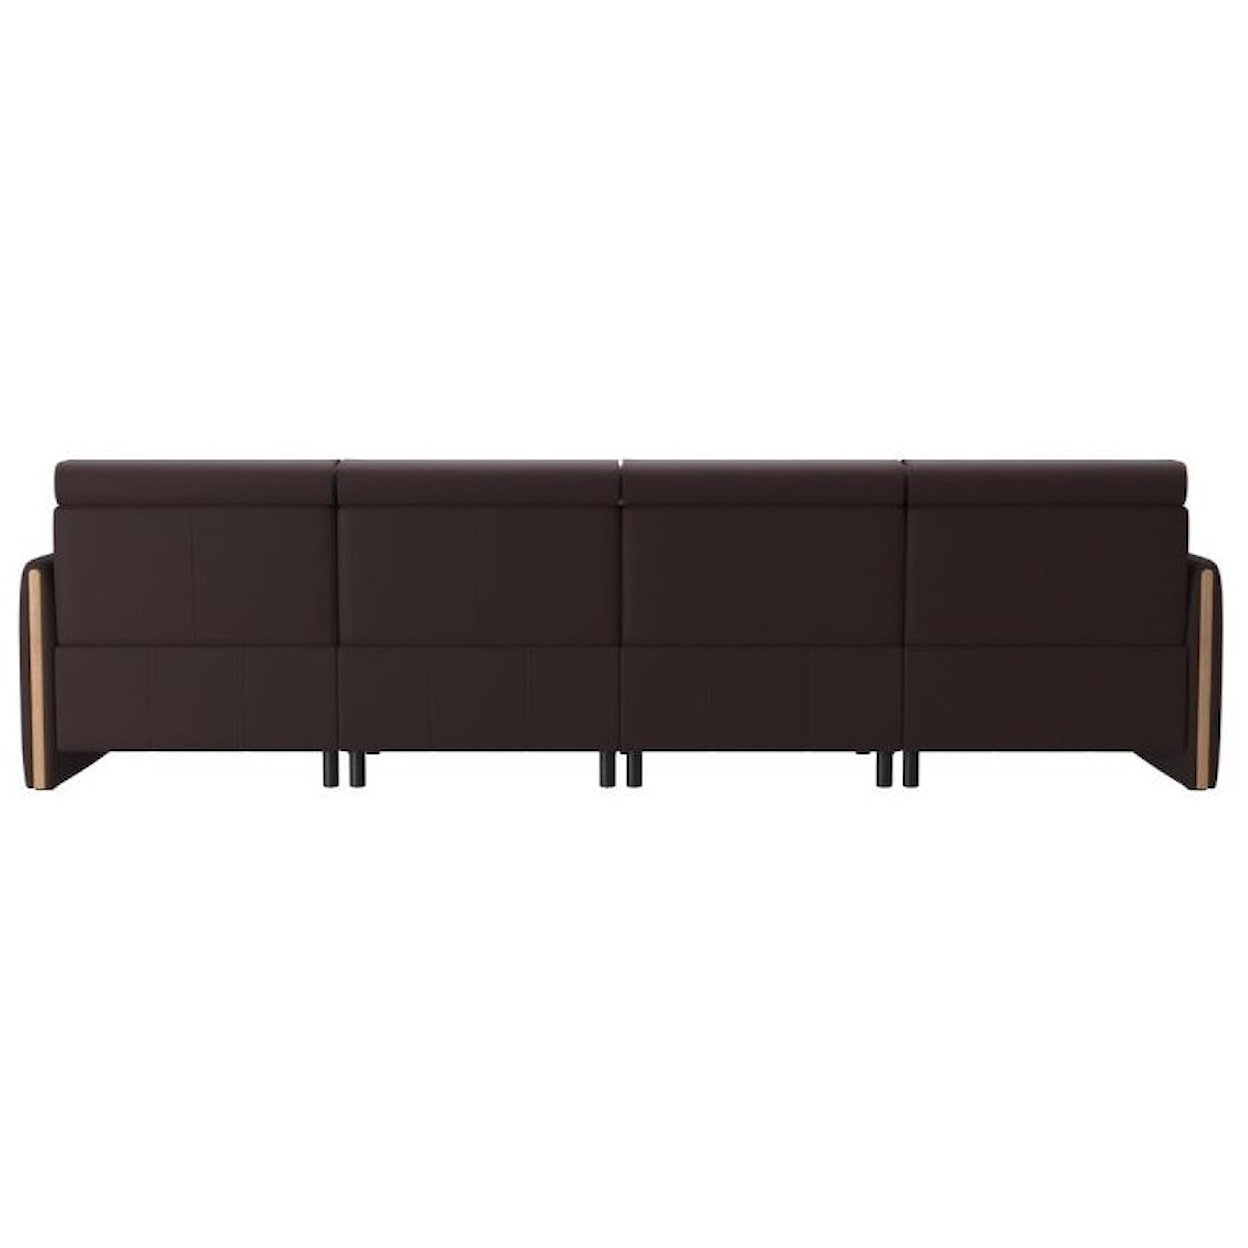 Stressless Emily Power 4-Seat Sofa with Wood Arms